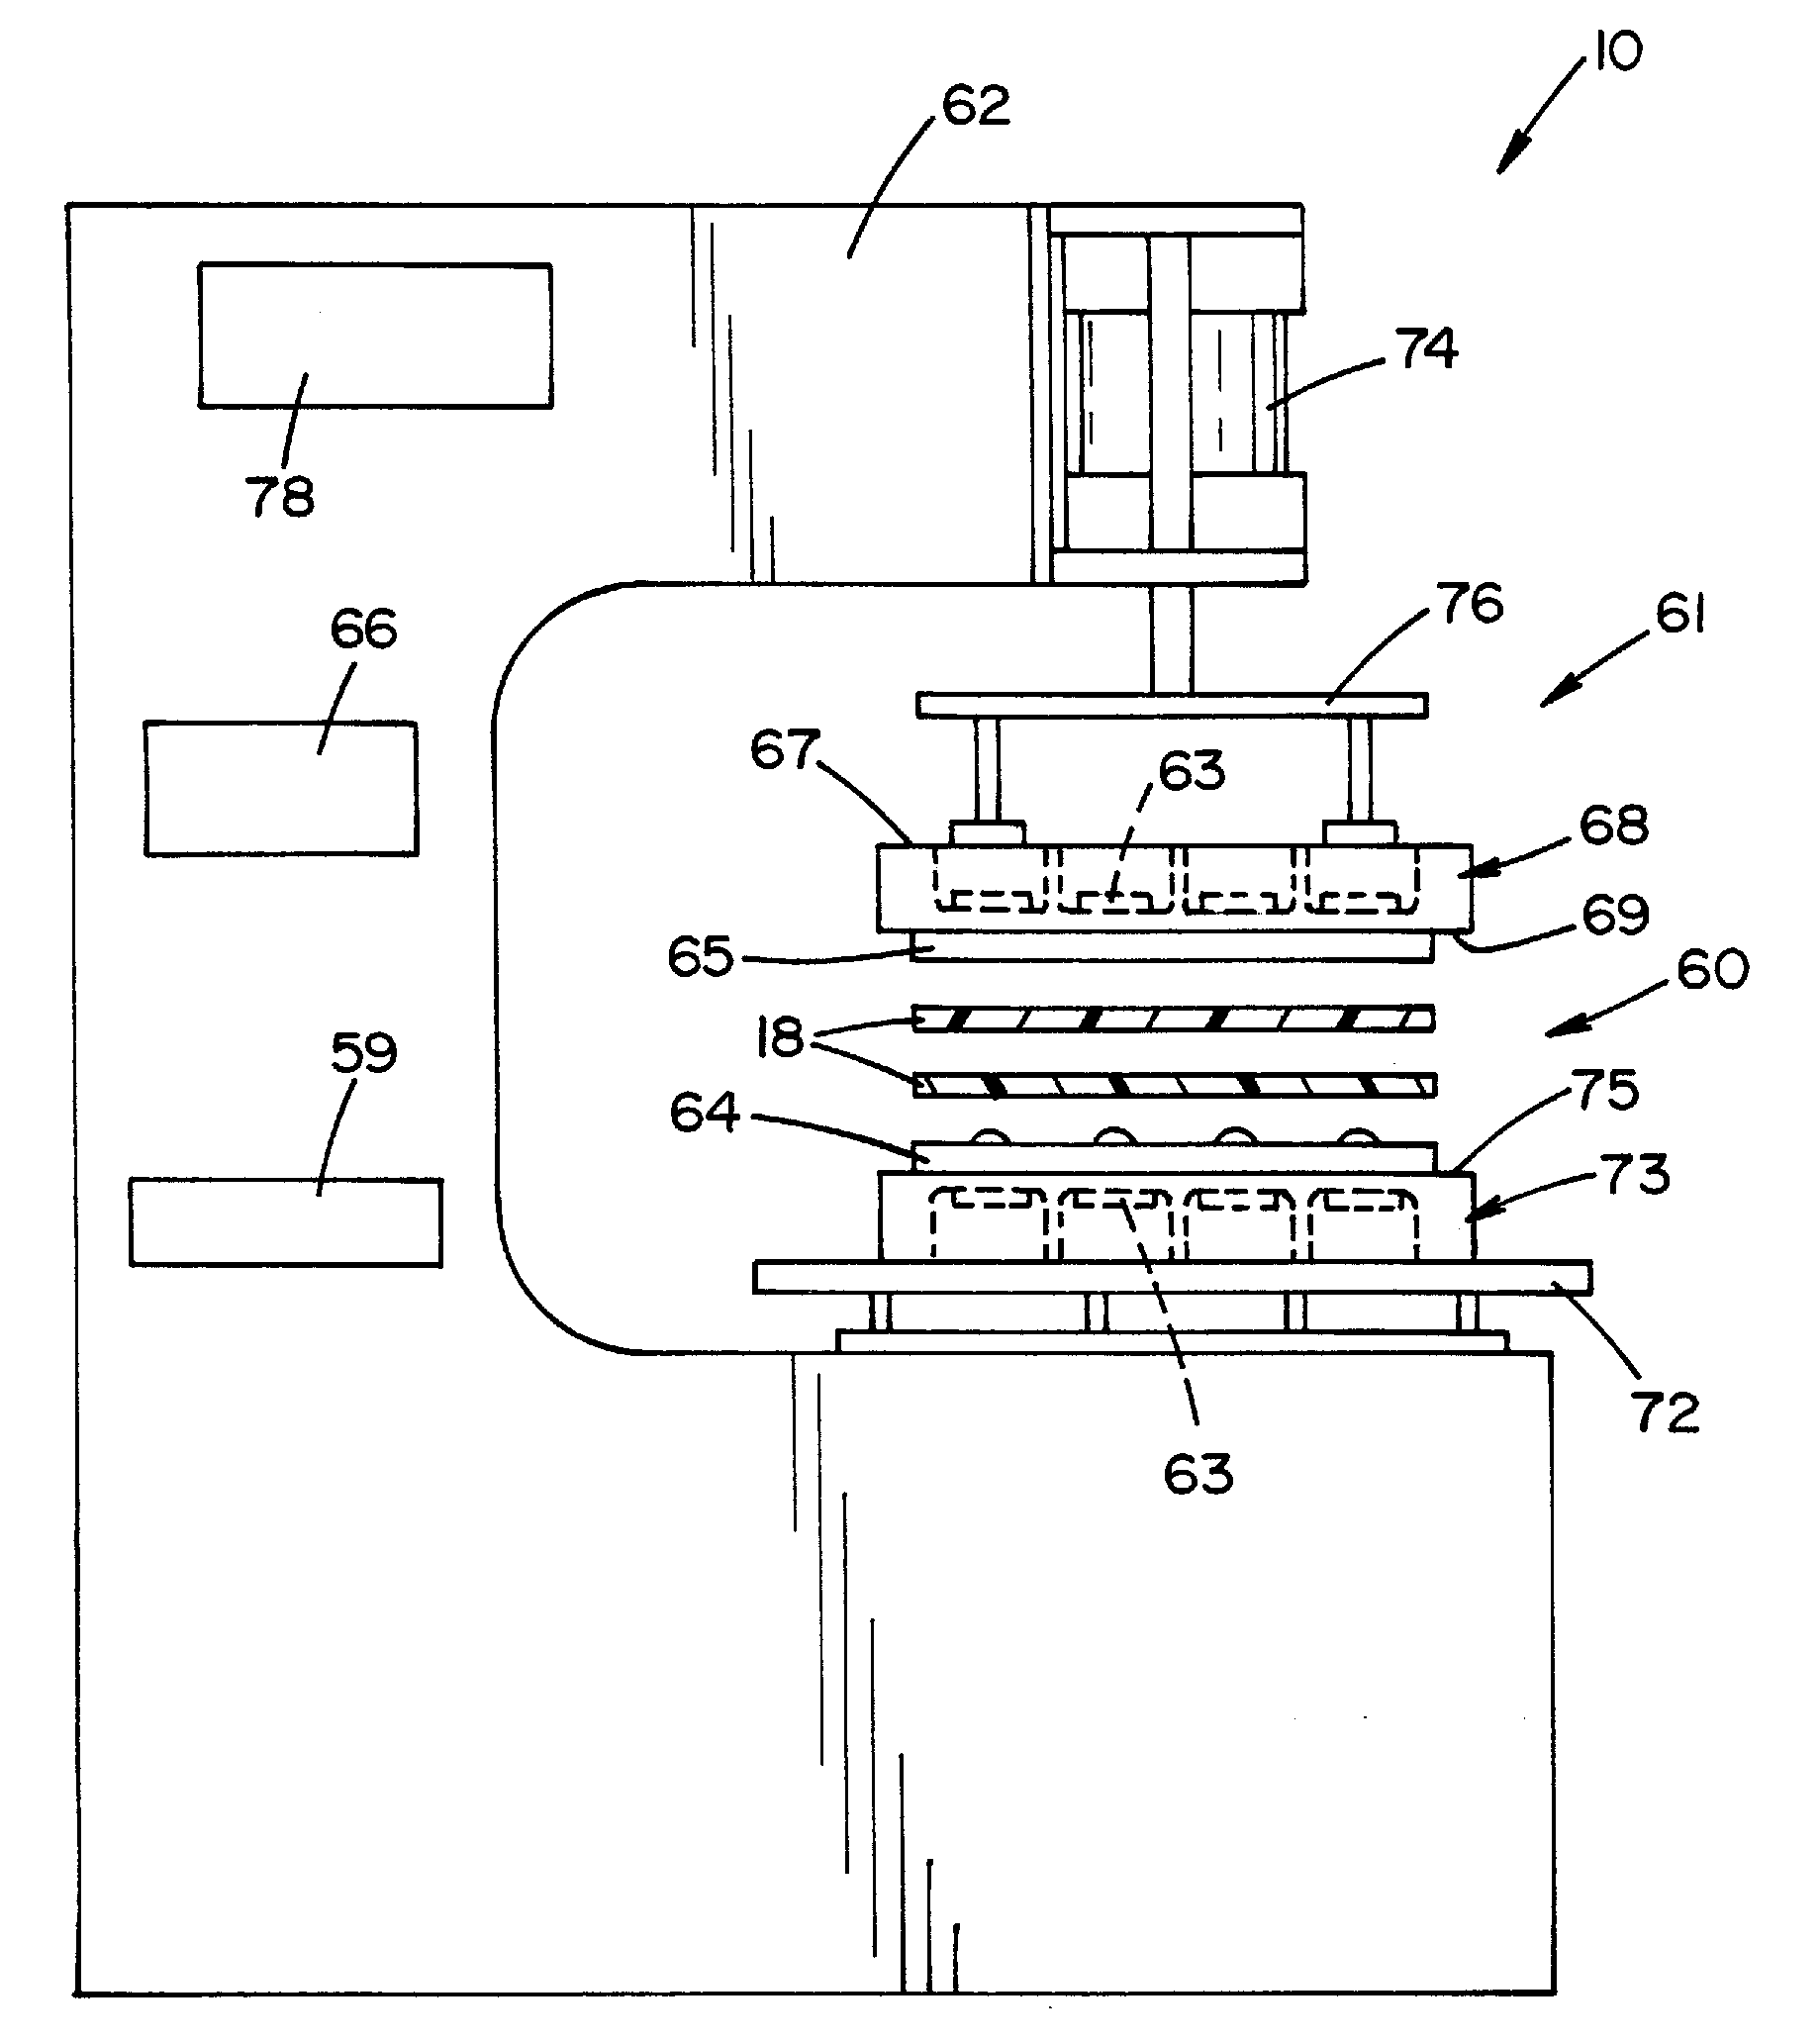 Method and apparatus for controlling the power output of a radio frequency sealing machine